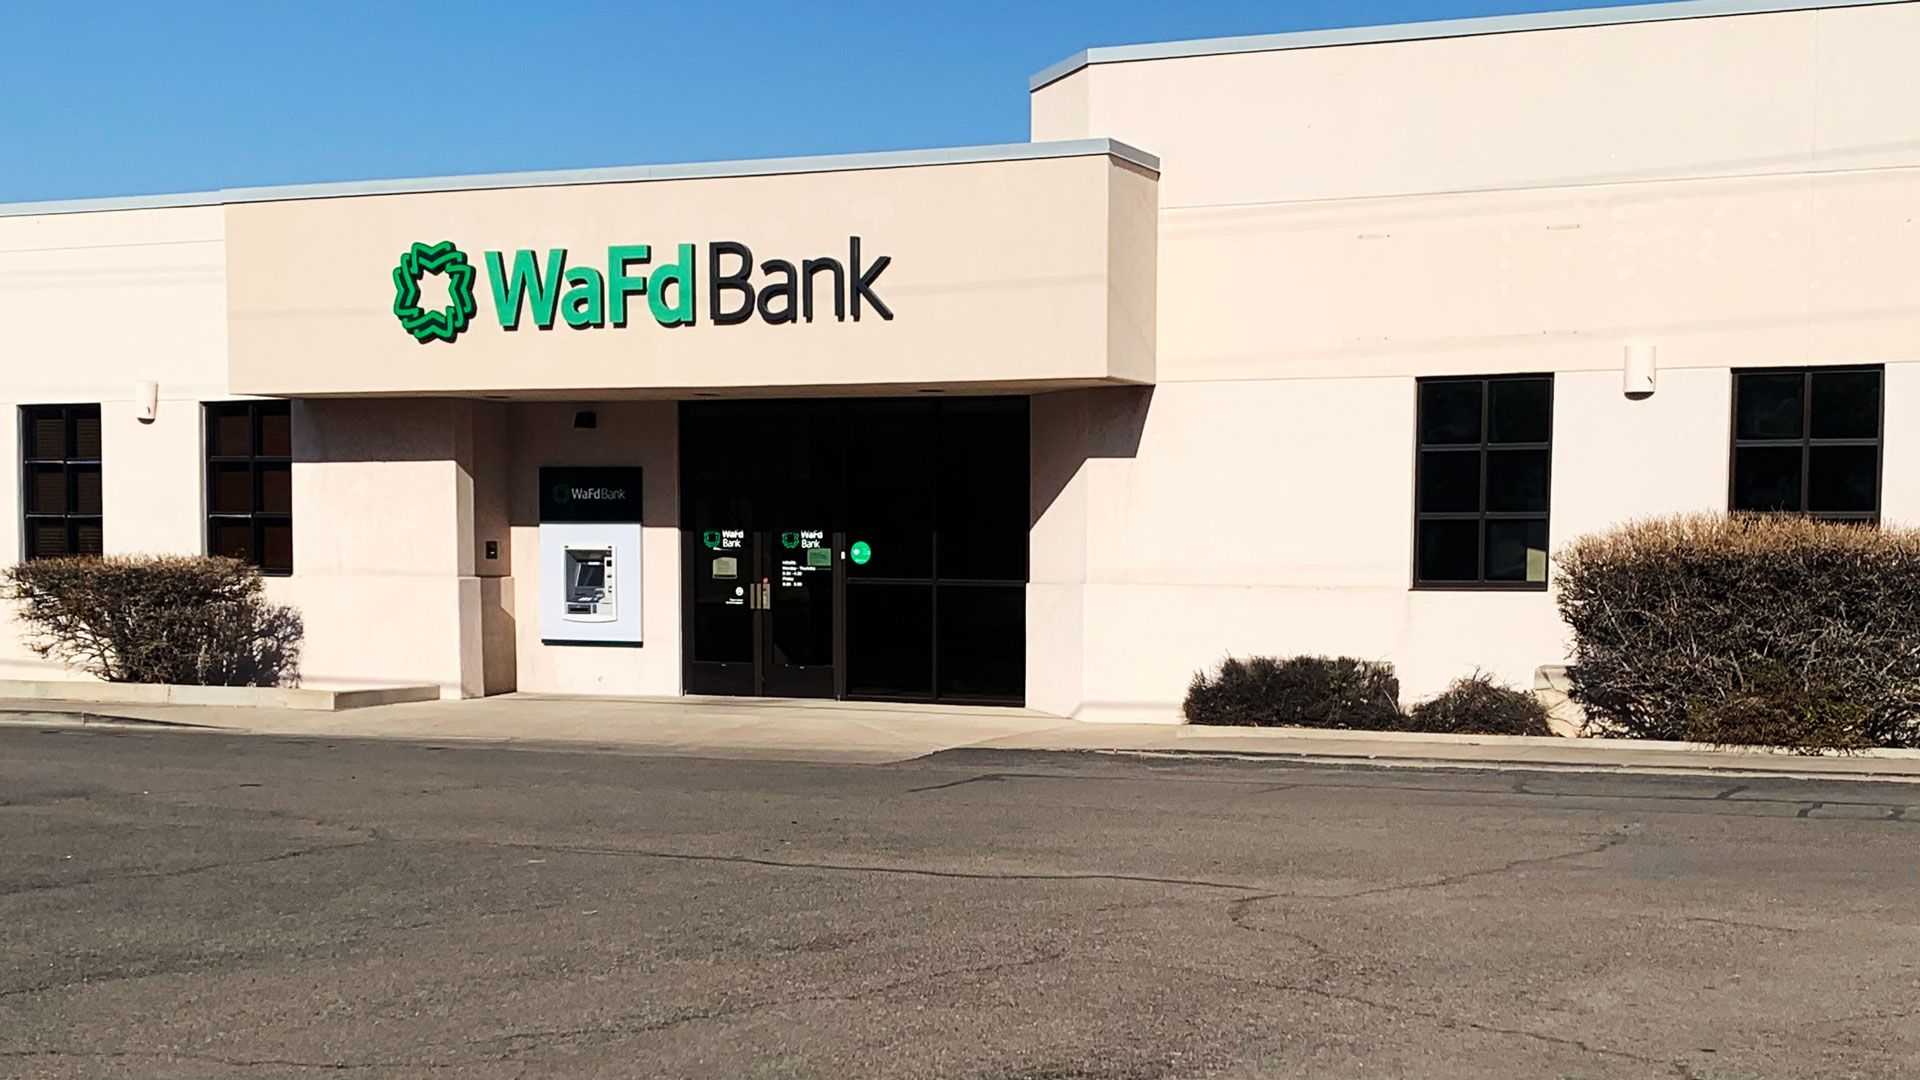 WaFd Bank in Roswell, NewMexico #1171 - Washington Federal.